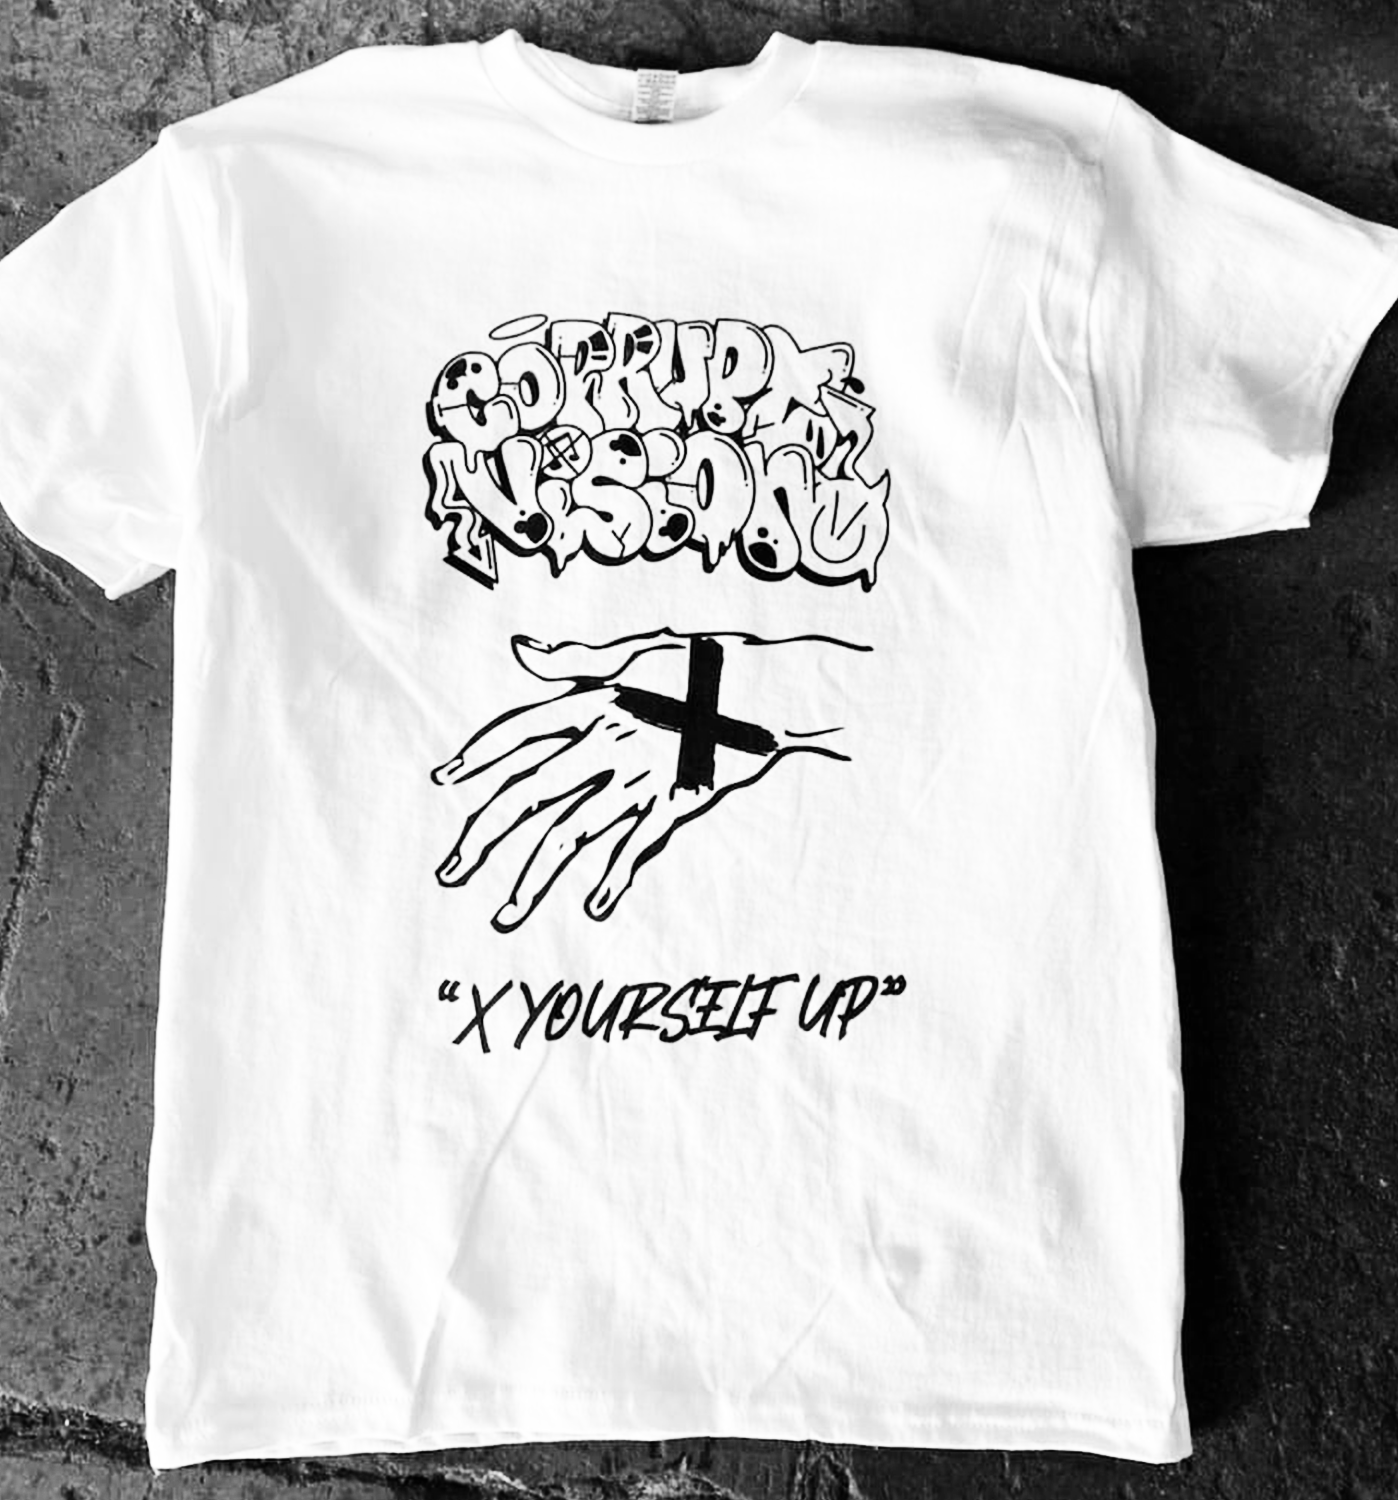 Corrupt Vision - "X YOURSELF UP" Shirt - LARGE